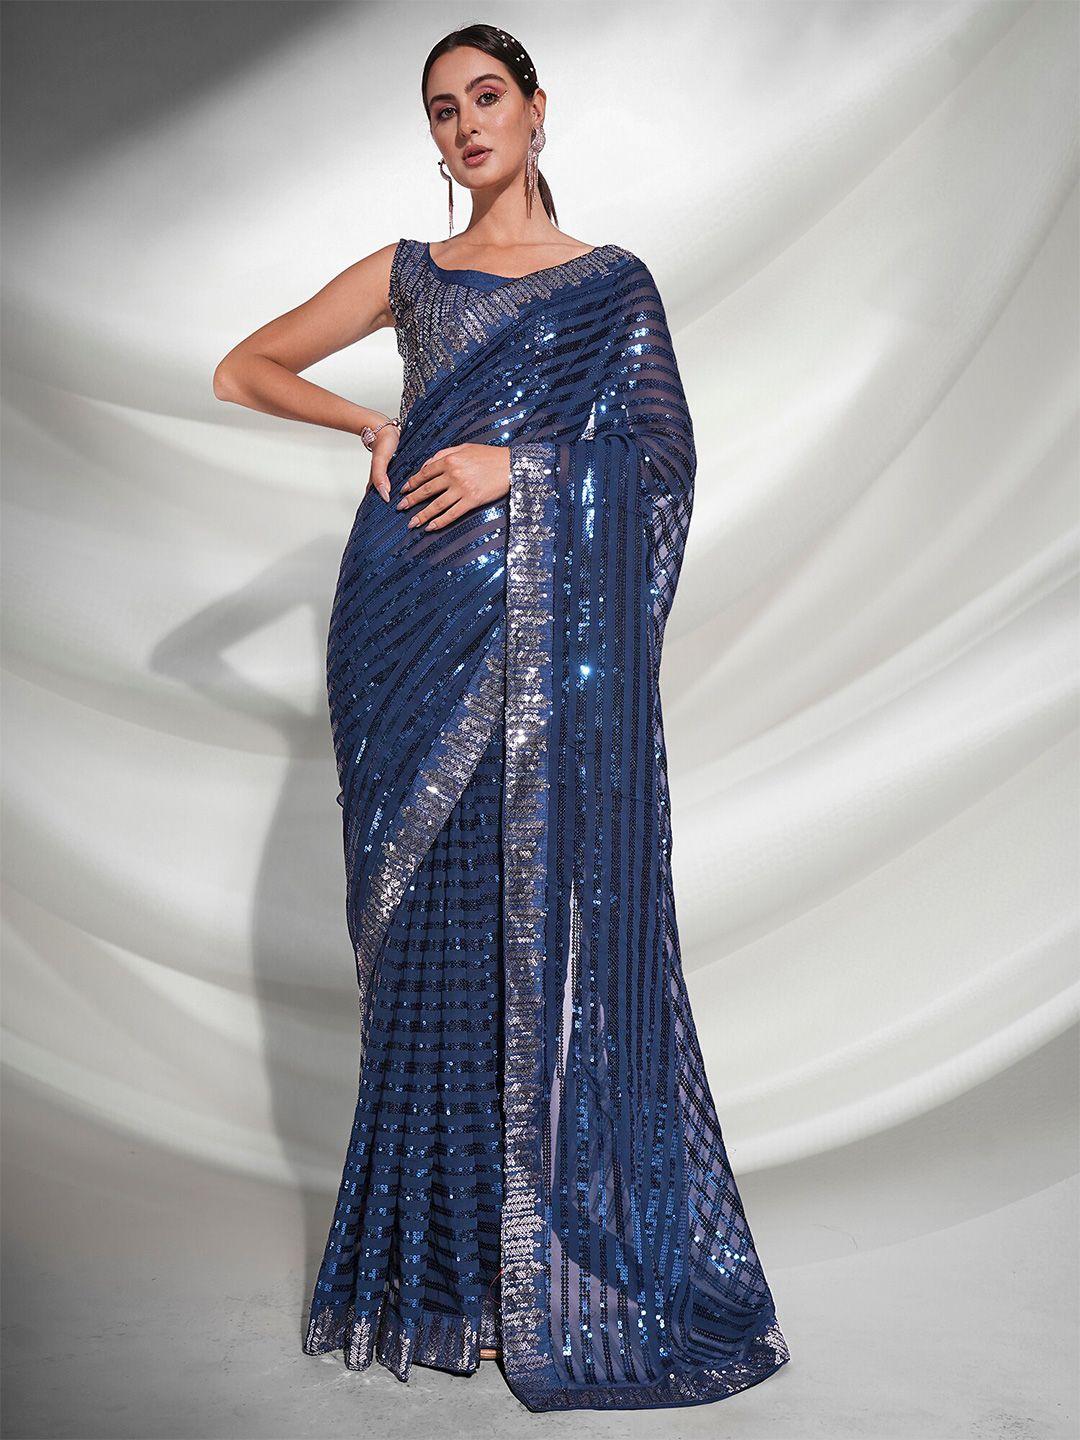 kalista striped embellished sequinned pure georgette saree